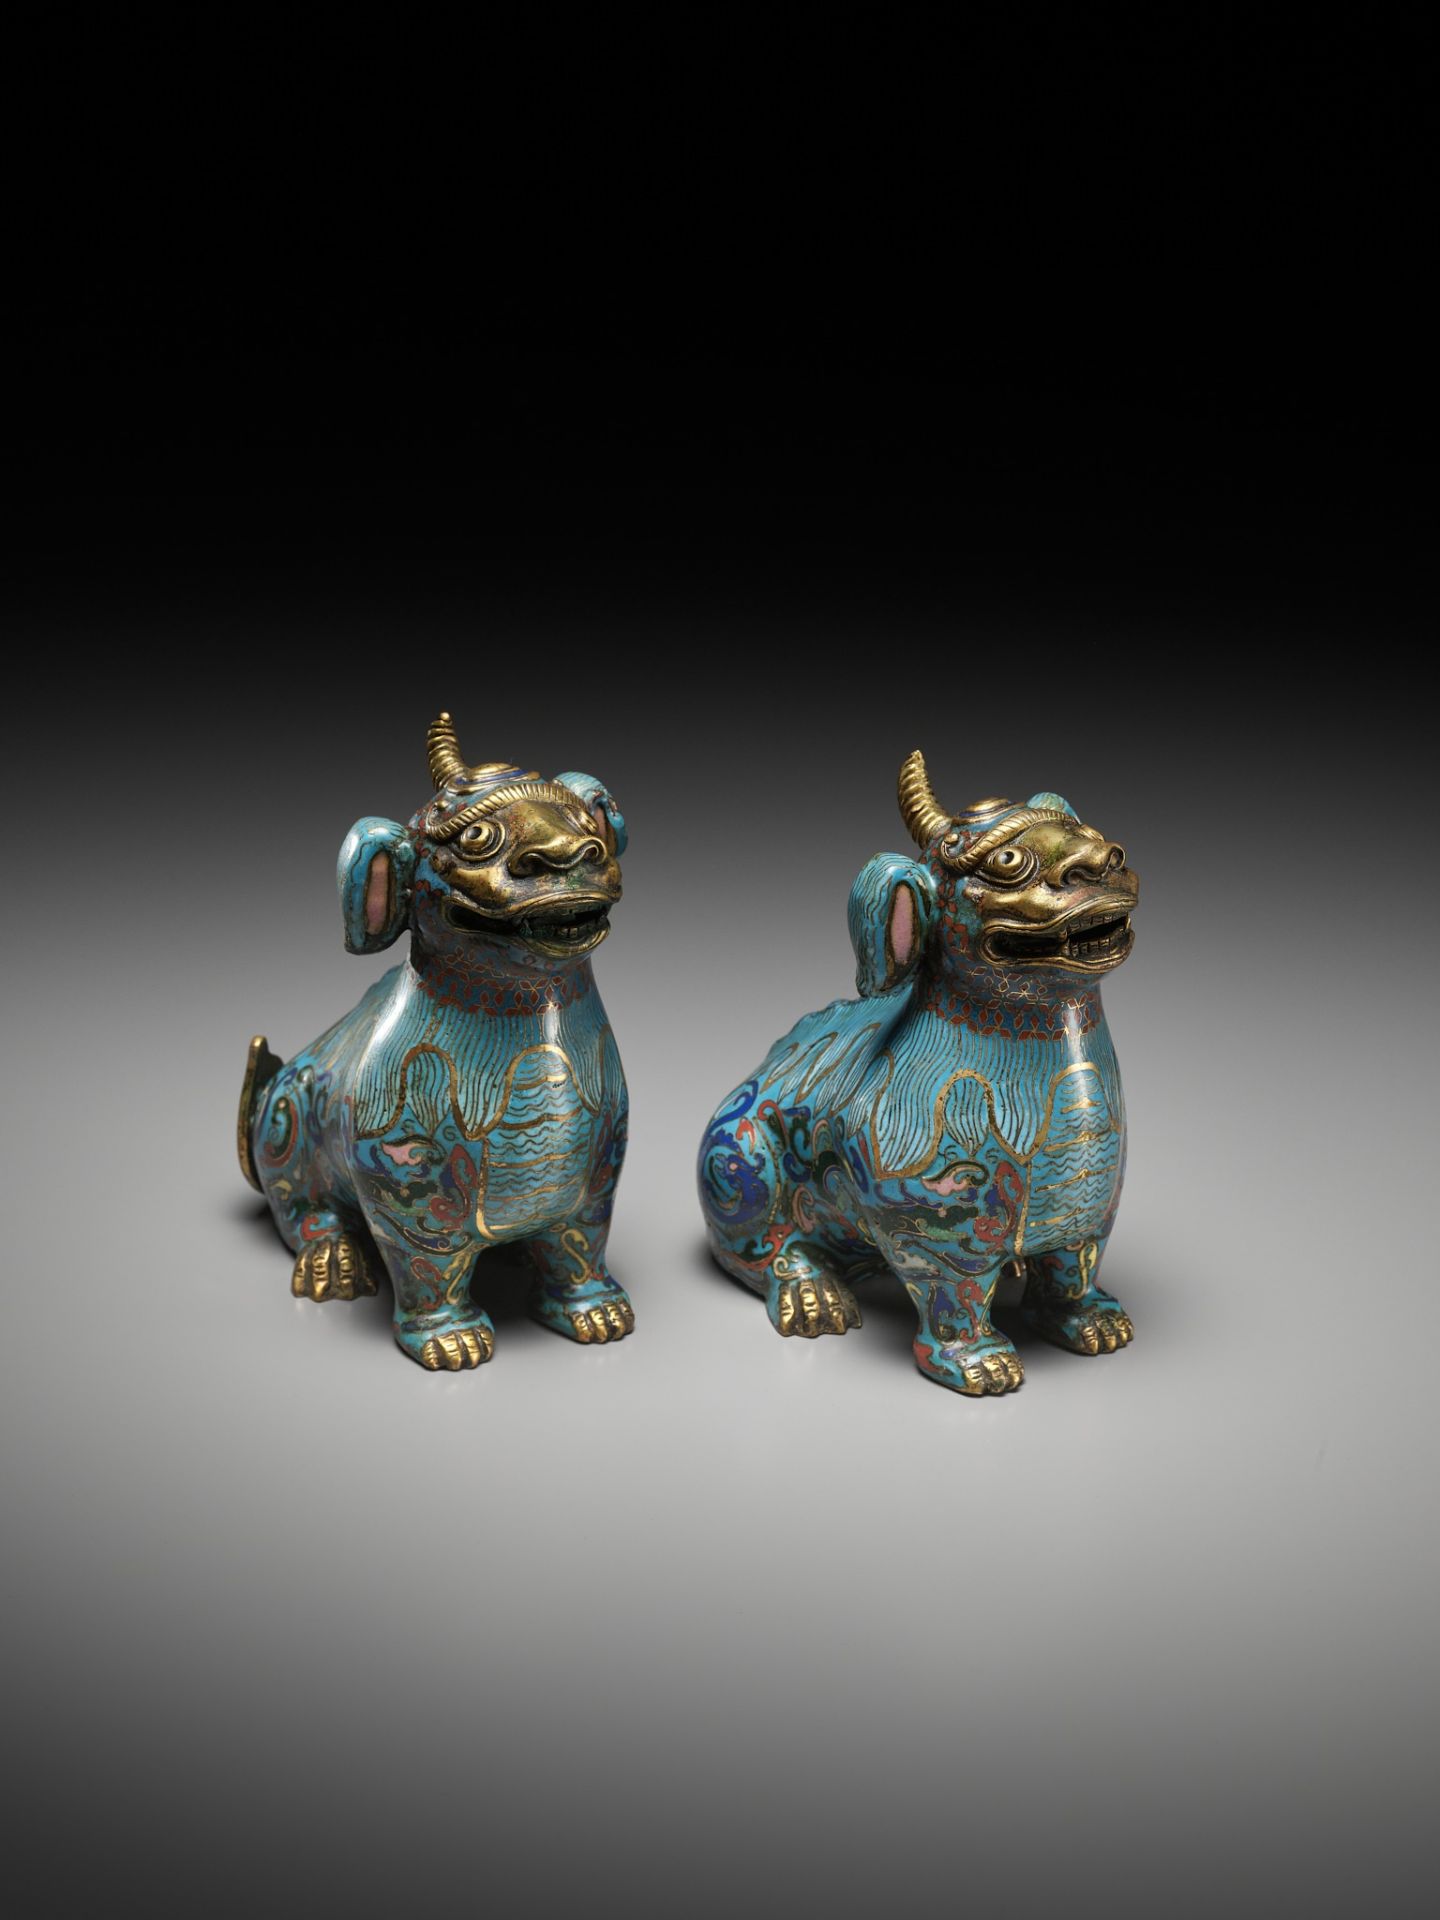 A PAIR OF GILT-BRONZE AND CLOISONNE ENAMEL LUDUAN, CHINA, 18TH - 19TH CENTURY - Image 6 of 11